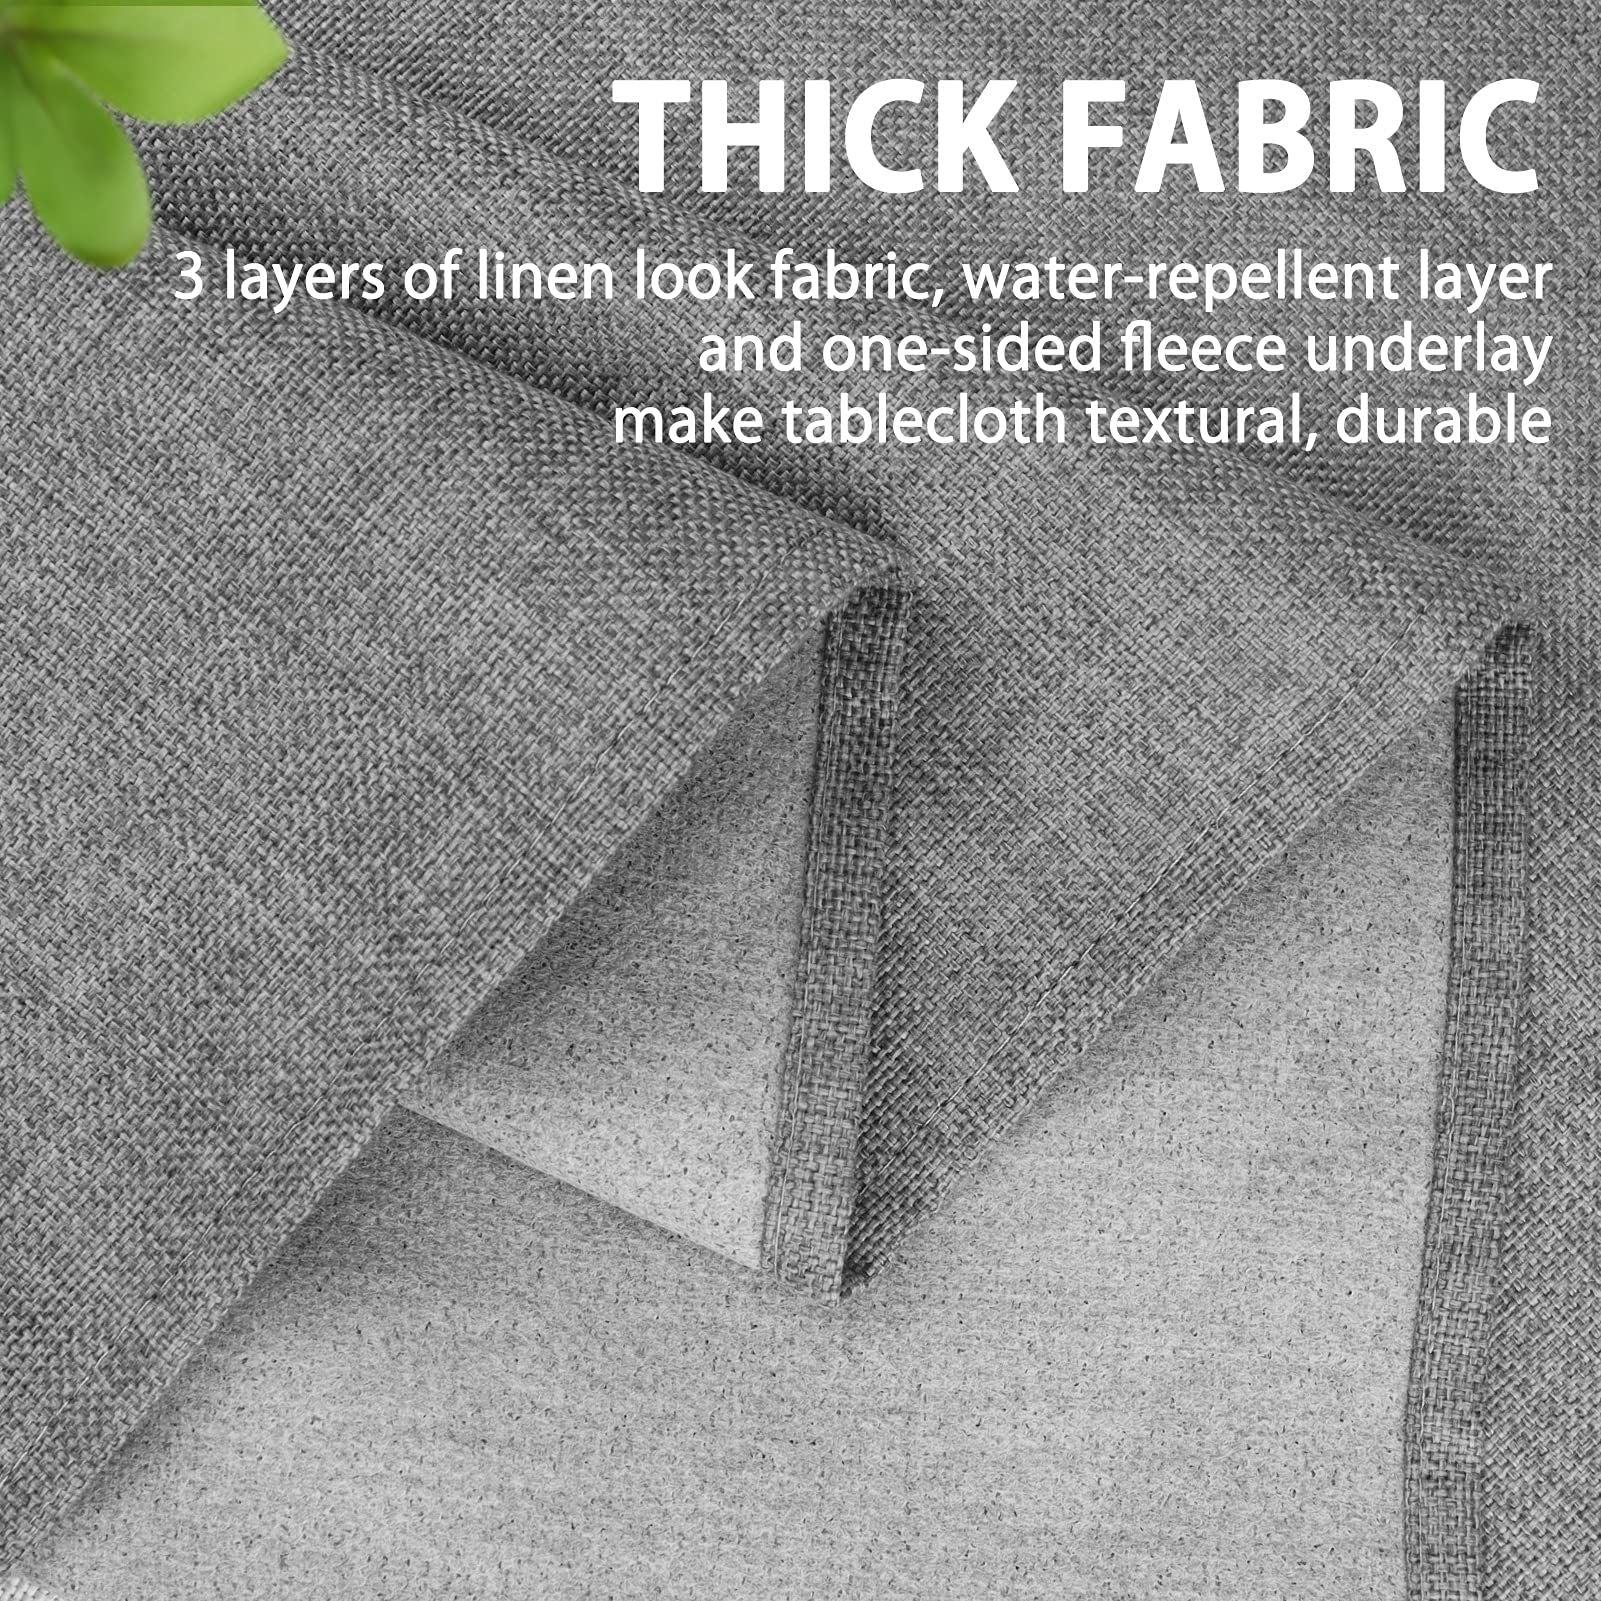 Rectangular Hessian Table Cloth Burlap Outdoor Table Cloth Grey 8ft Table Cloths Faux Linen Tablecloths Fabric Thick Table Cloth Garden Water Repellent Wear Resistant 55x94in(140x240cm) Light Grey 4